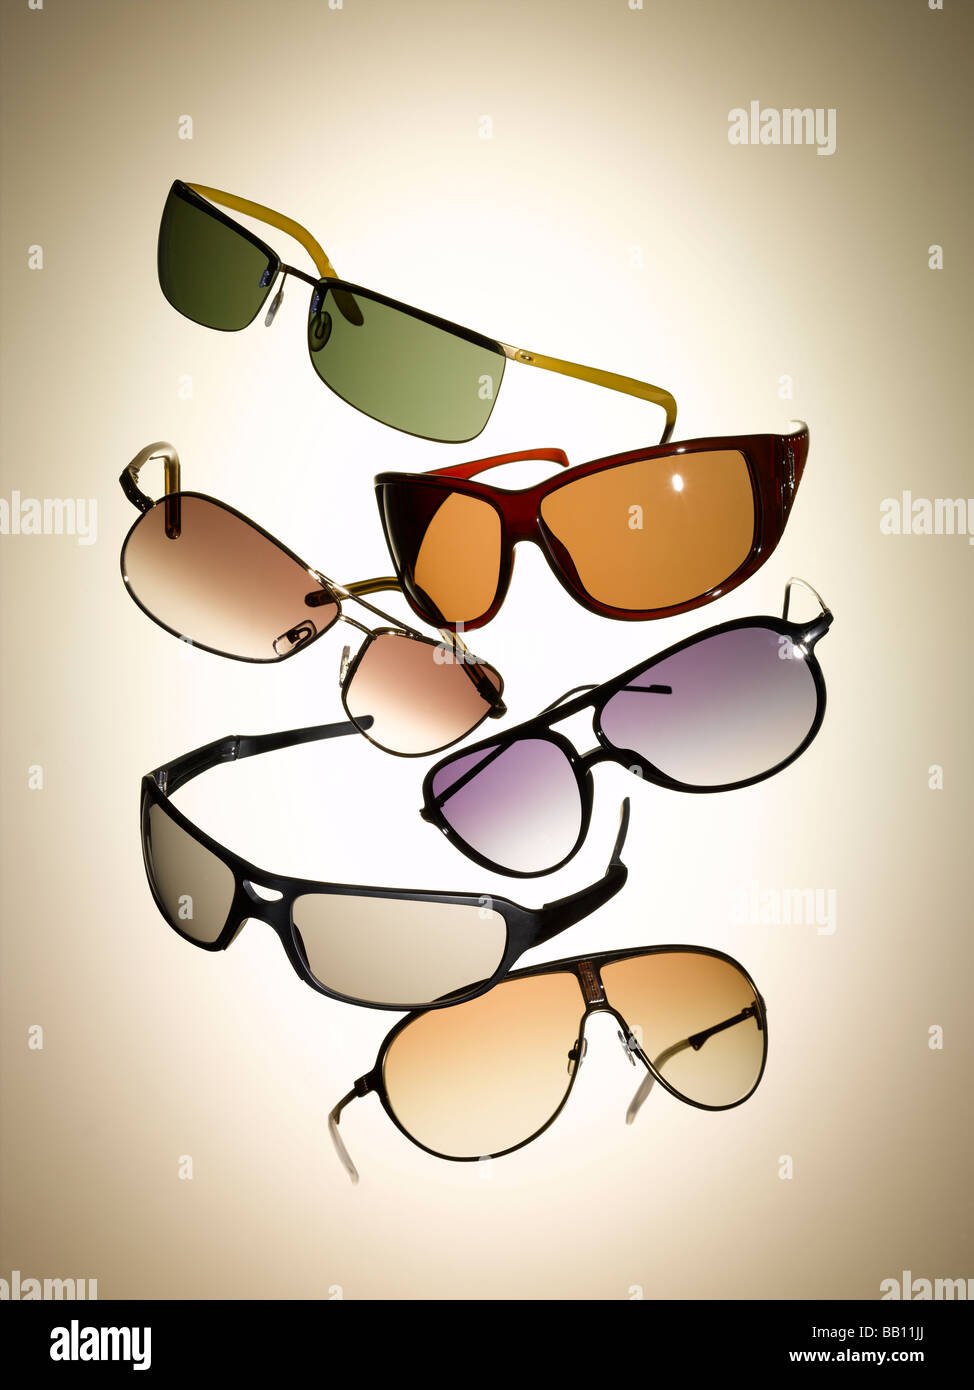 A collection of sun glasses Stock Photo